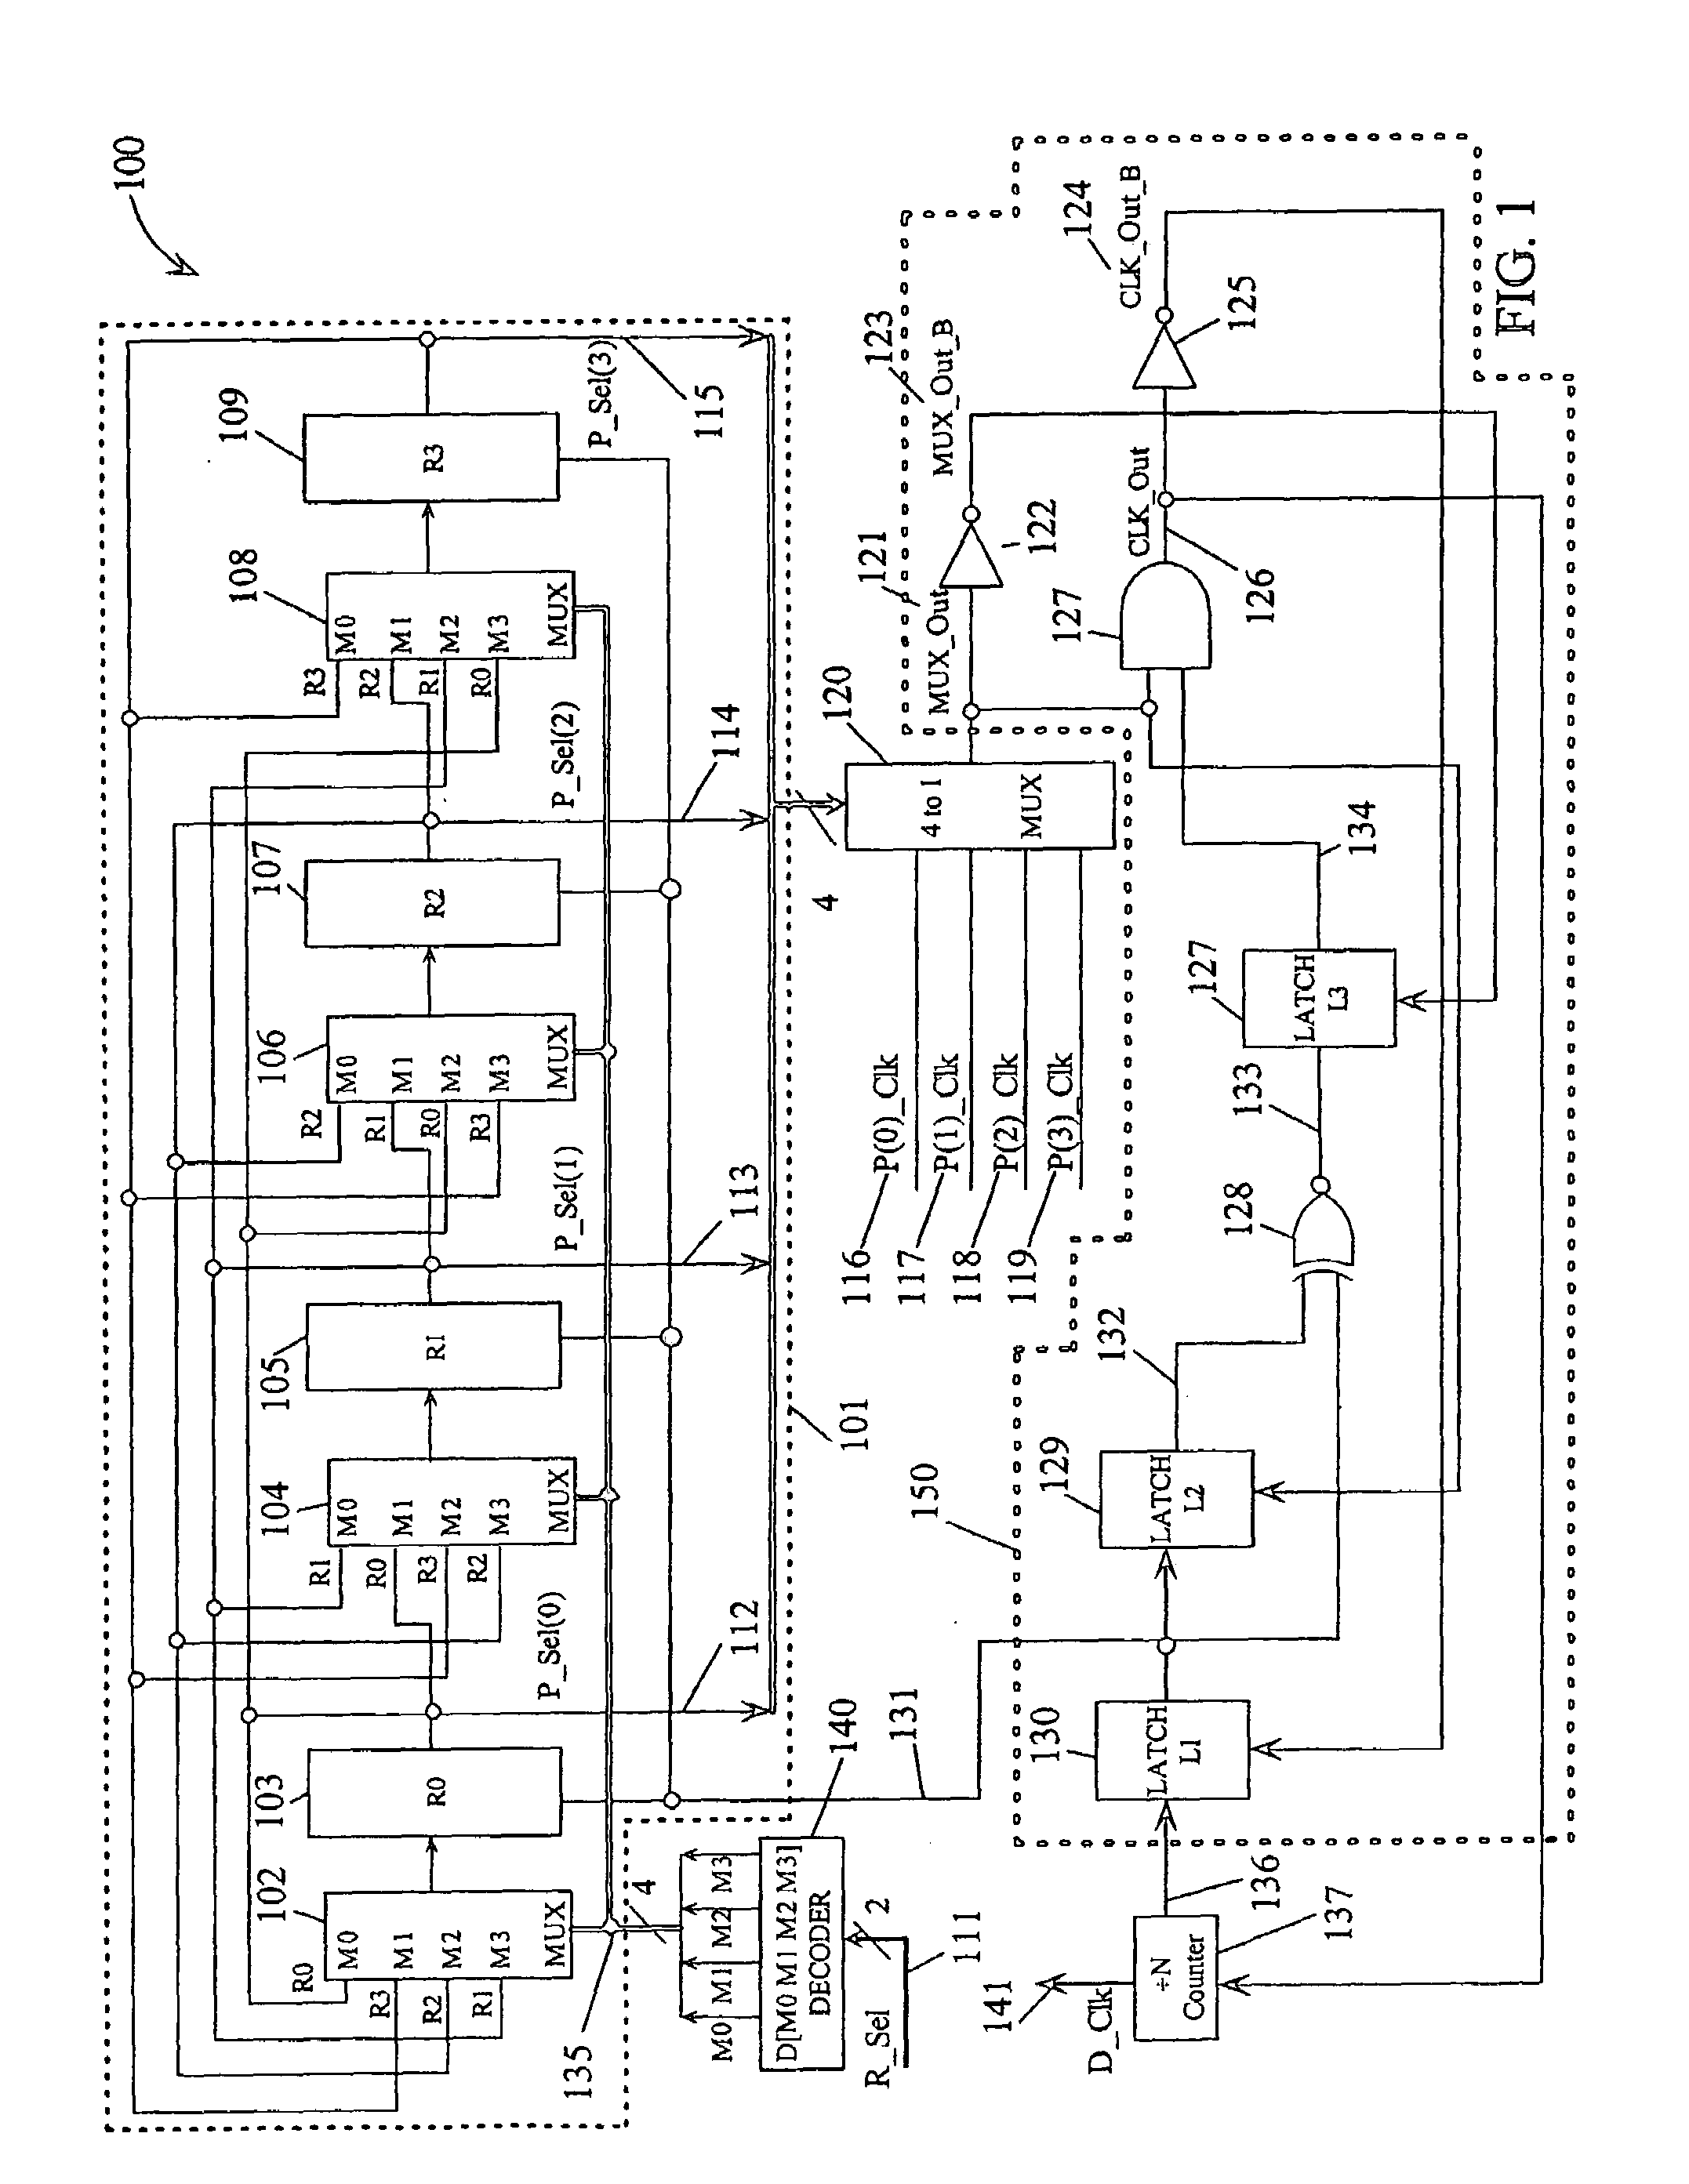 Phase clock selector for generating a non-integer frequency division